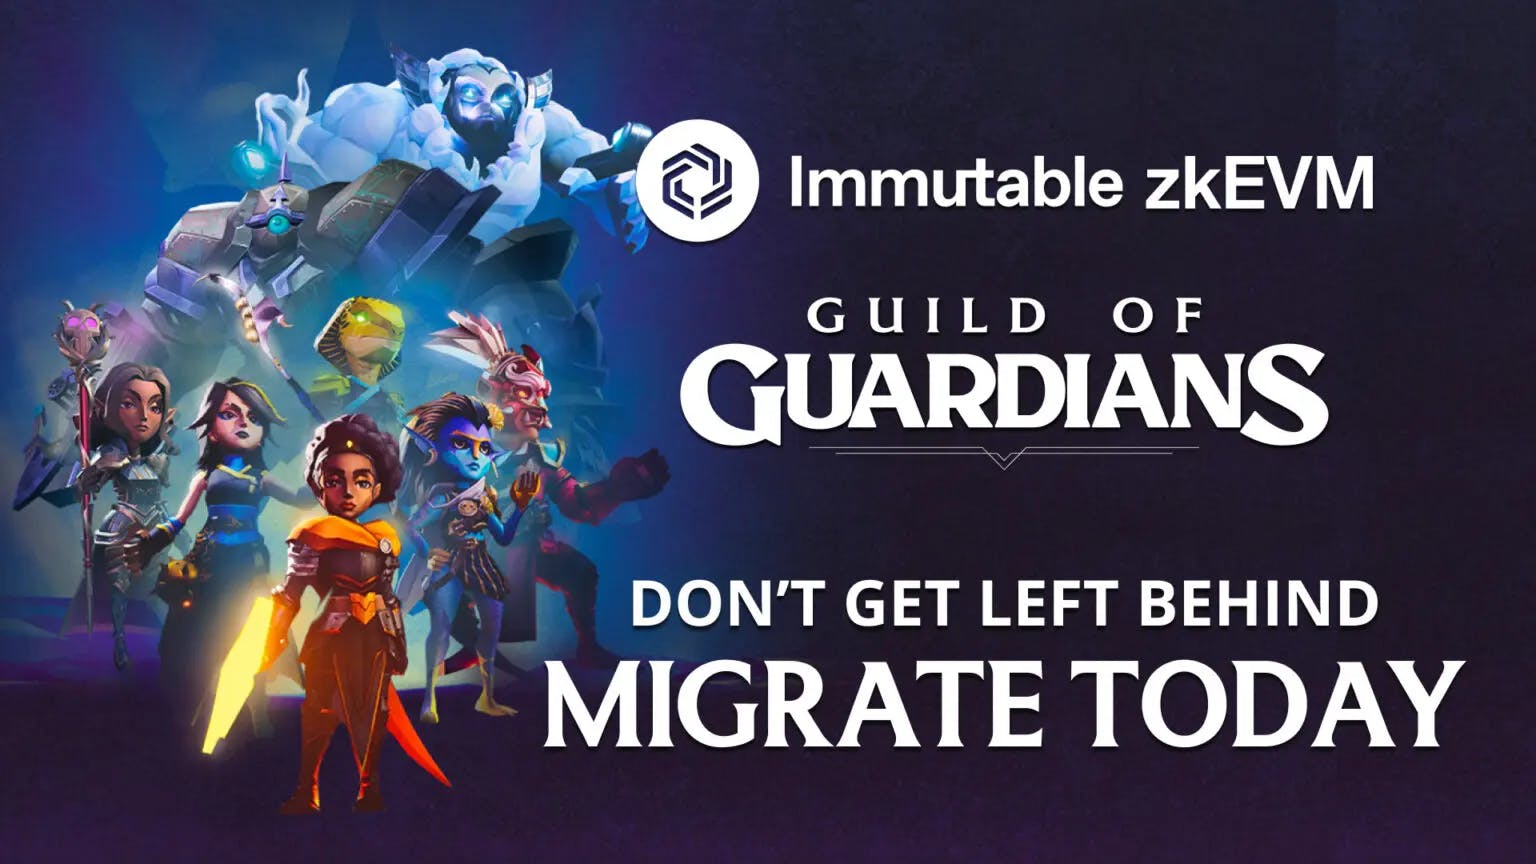 Guild of Guardians to Launch on Immutable zkEVM with NFT Migration